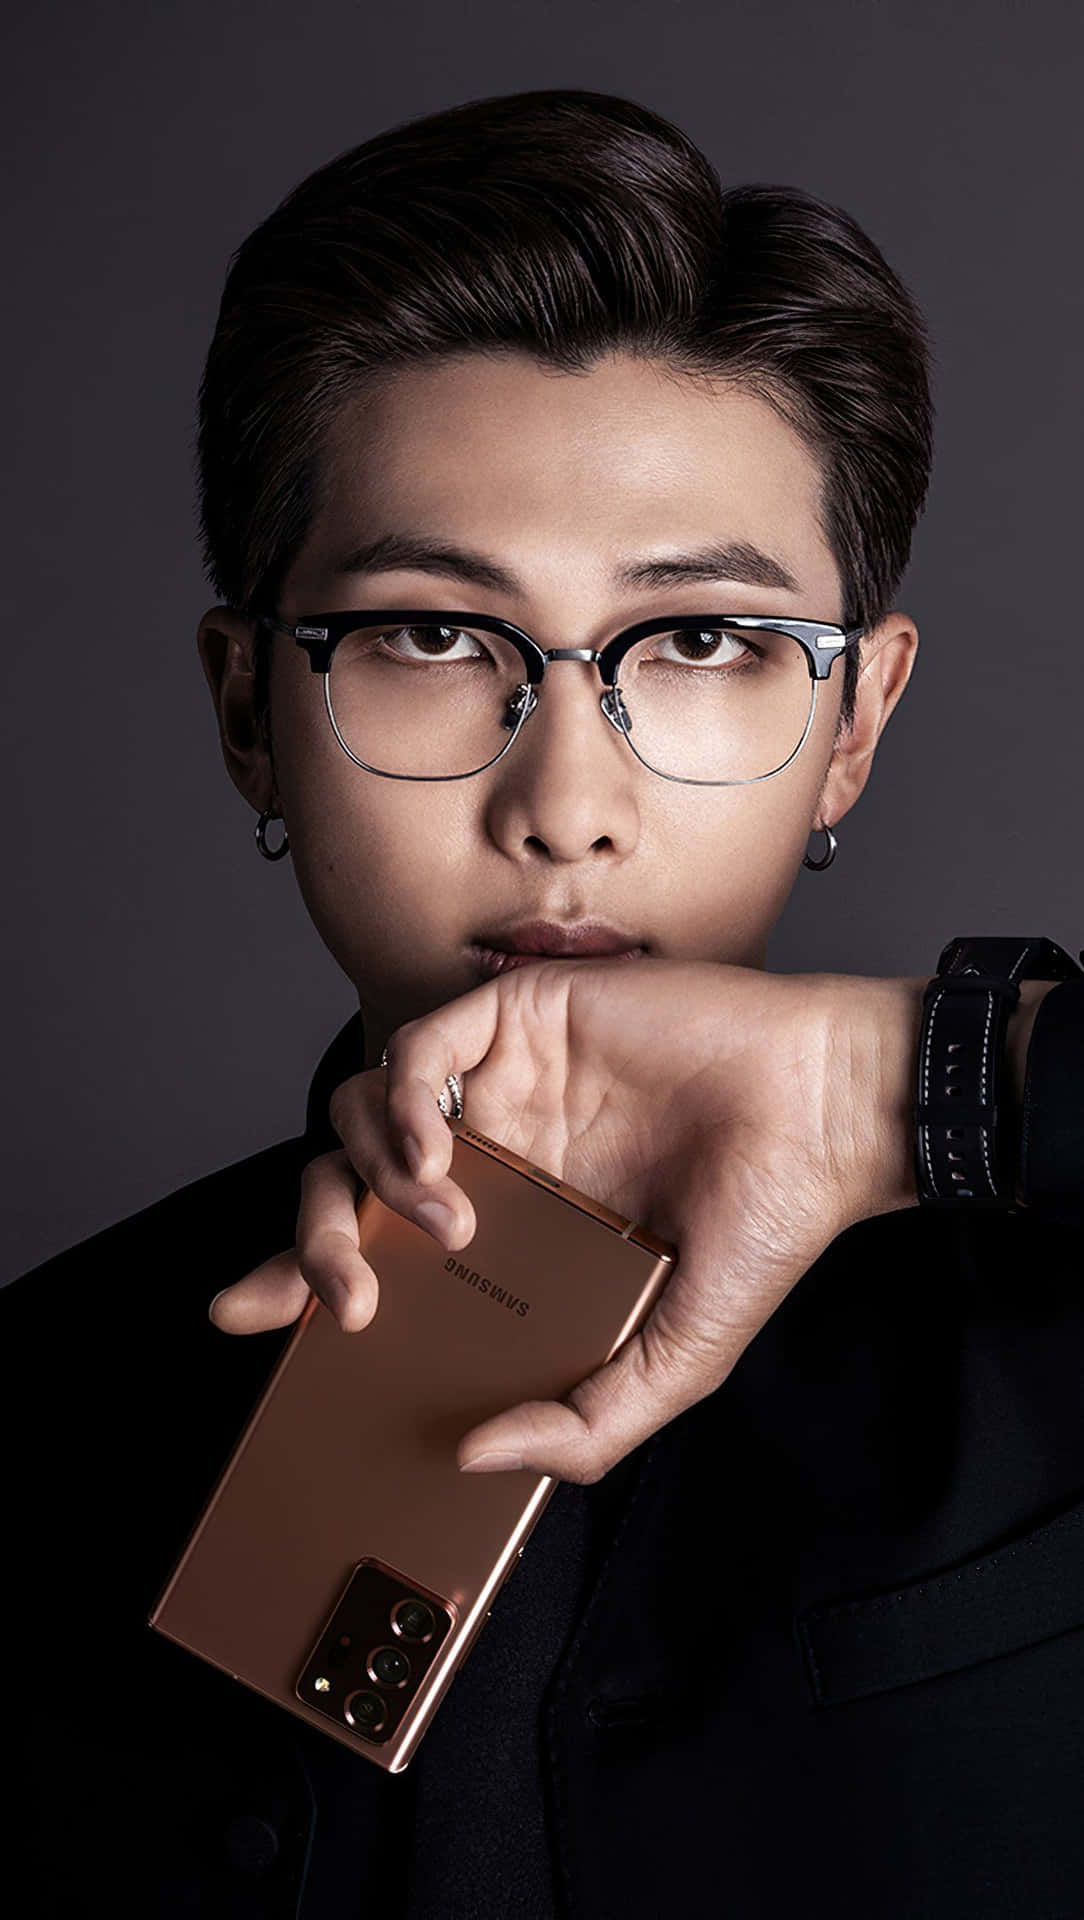 RM With Phone As Face Reference Wallpaper